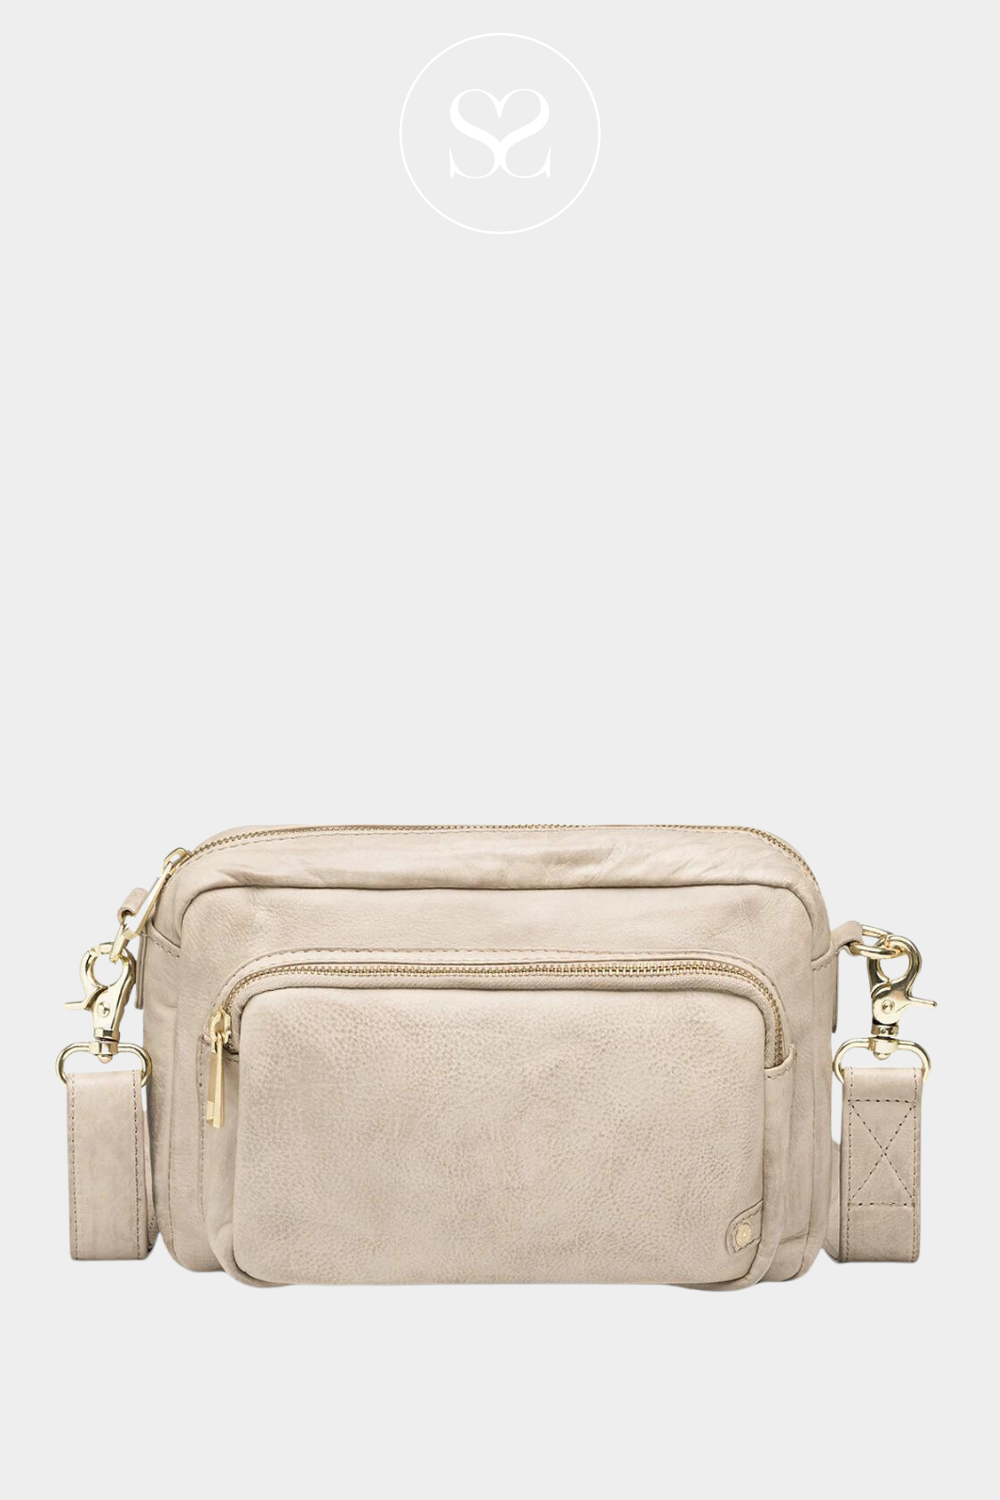 soft leather crossbody bag in sand from Depeche